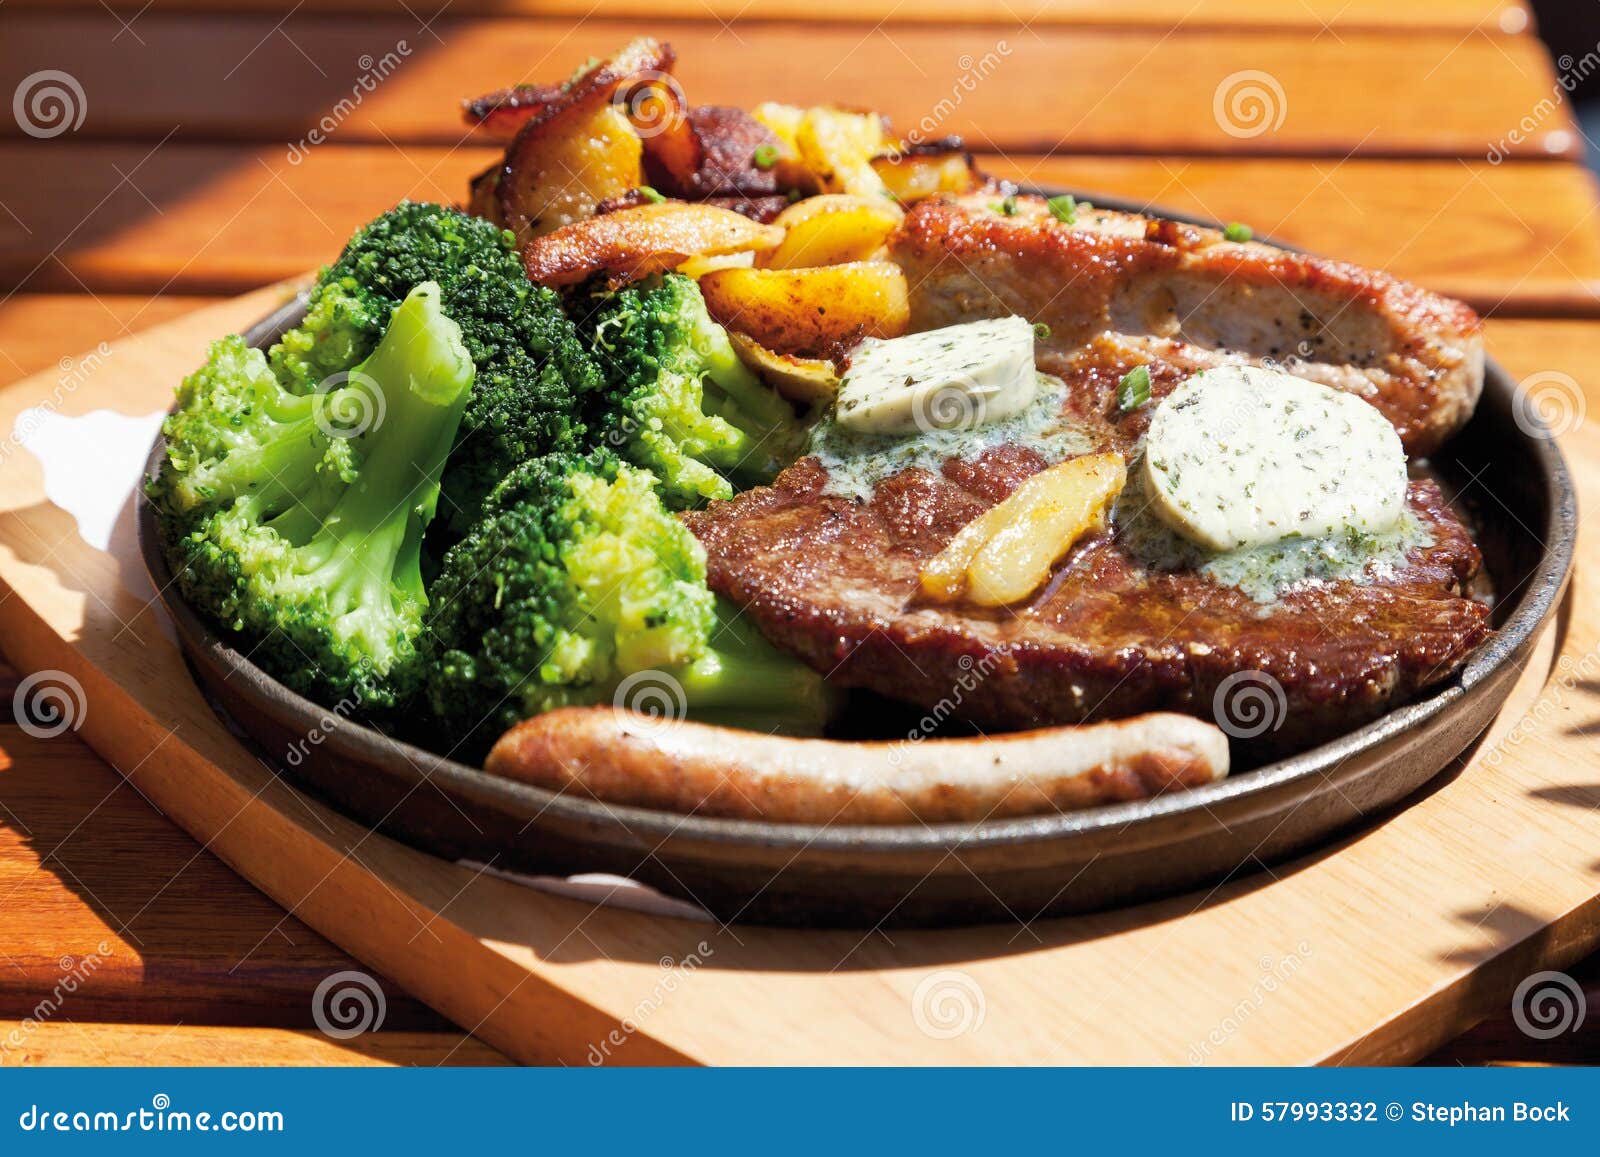 gourmand pan with roasted meat,herbed butter,fried potatoes